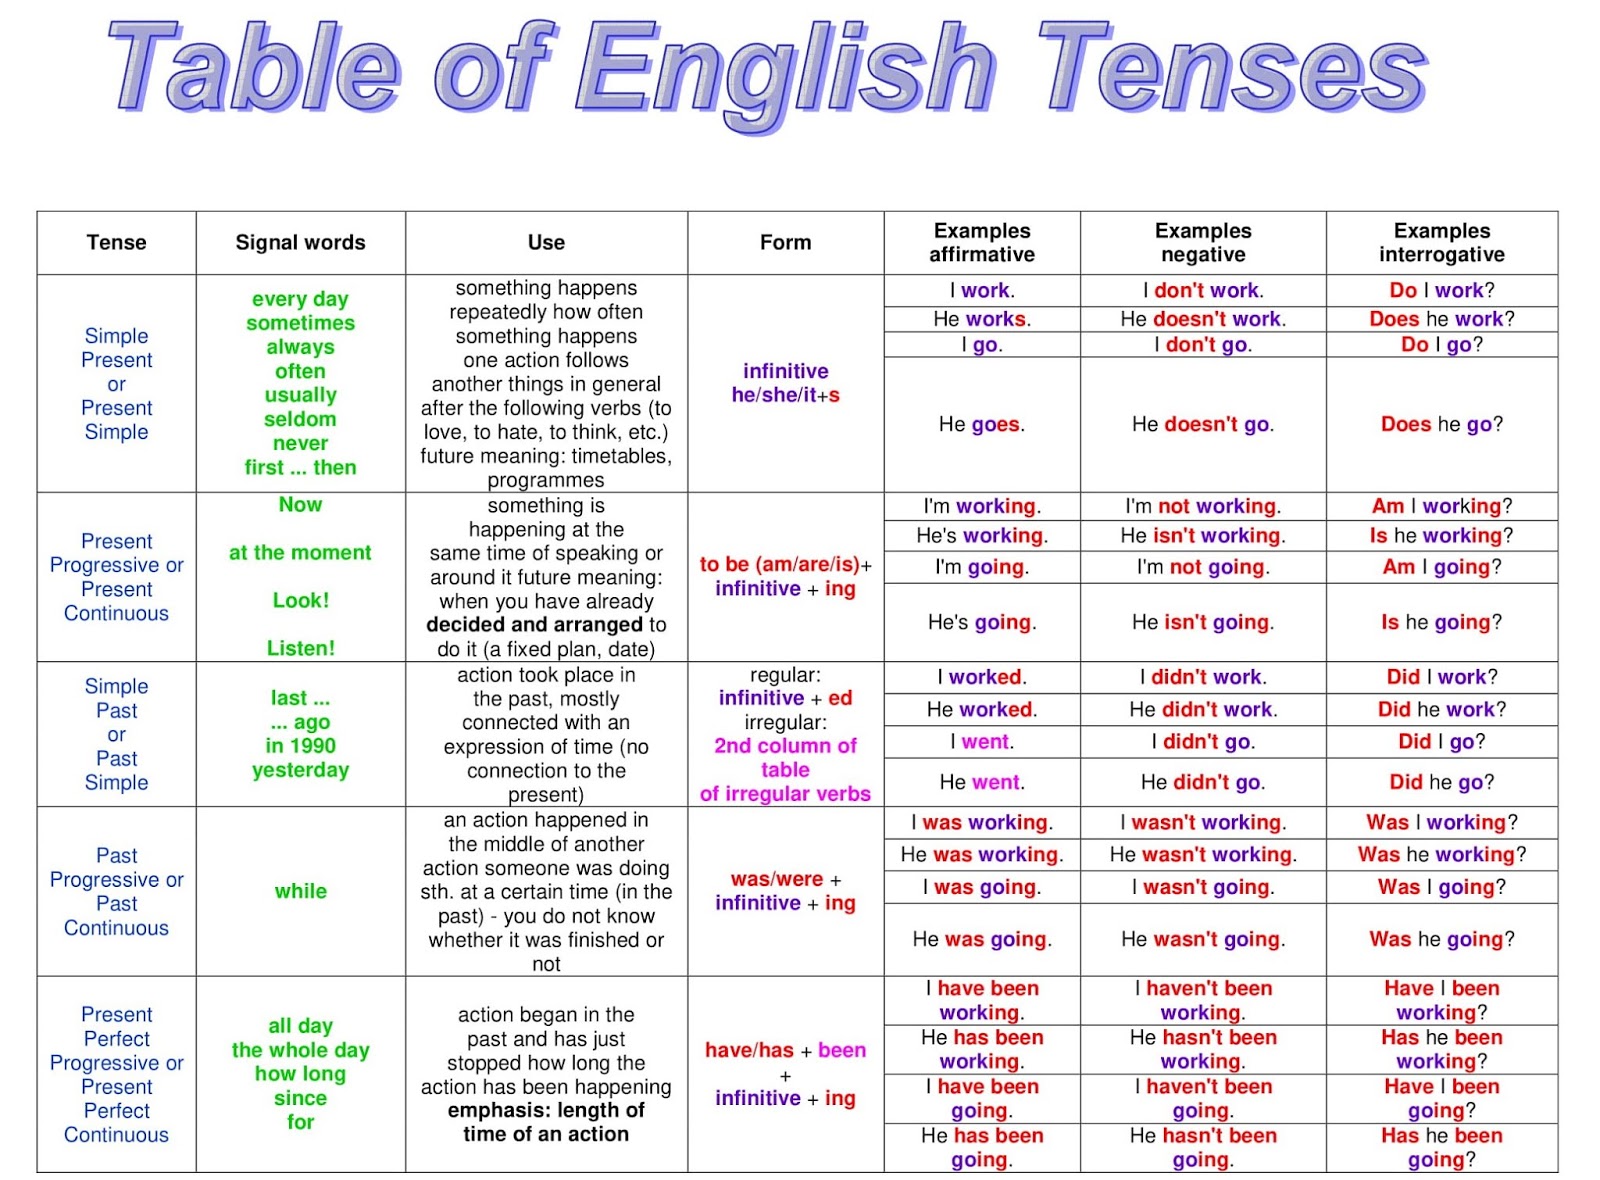 english-grammar-a-to-z-table-of-english-tenses-with-example